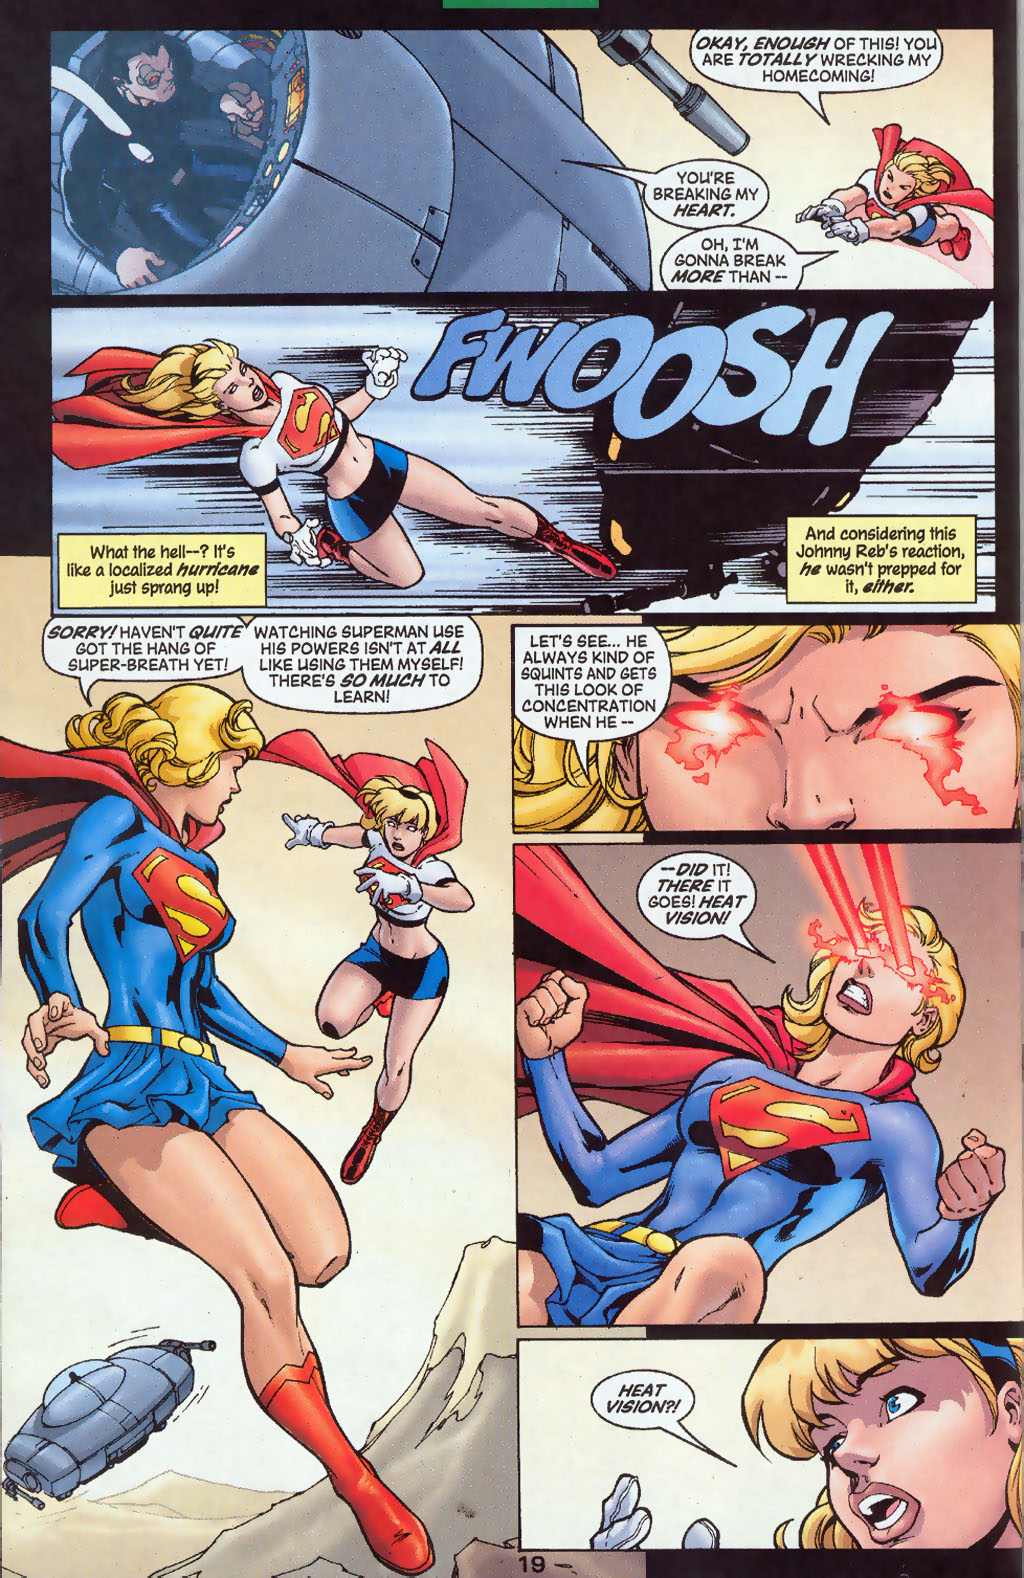 Supergirl (1996) 75 Page 19